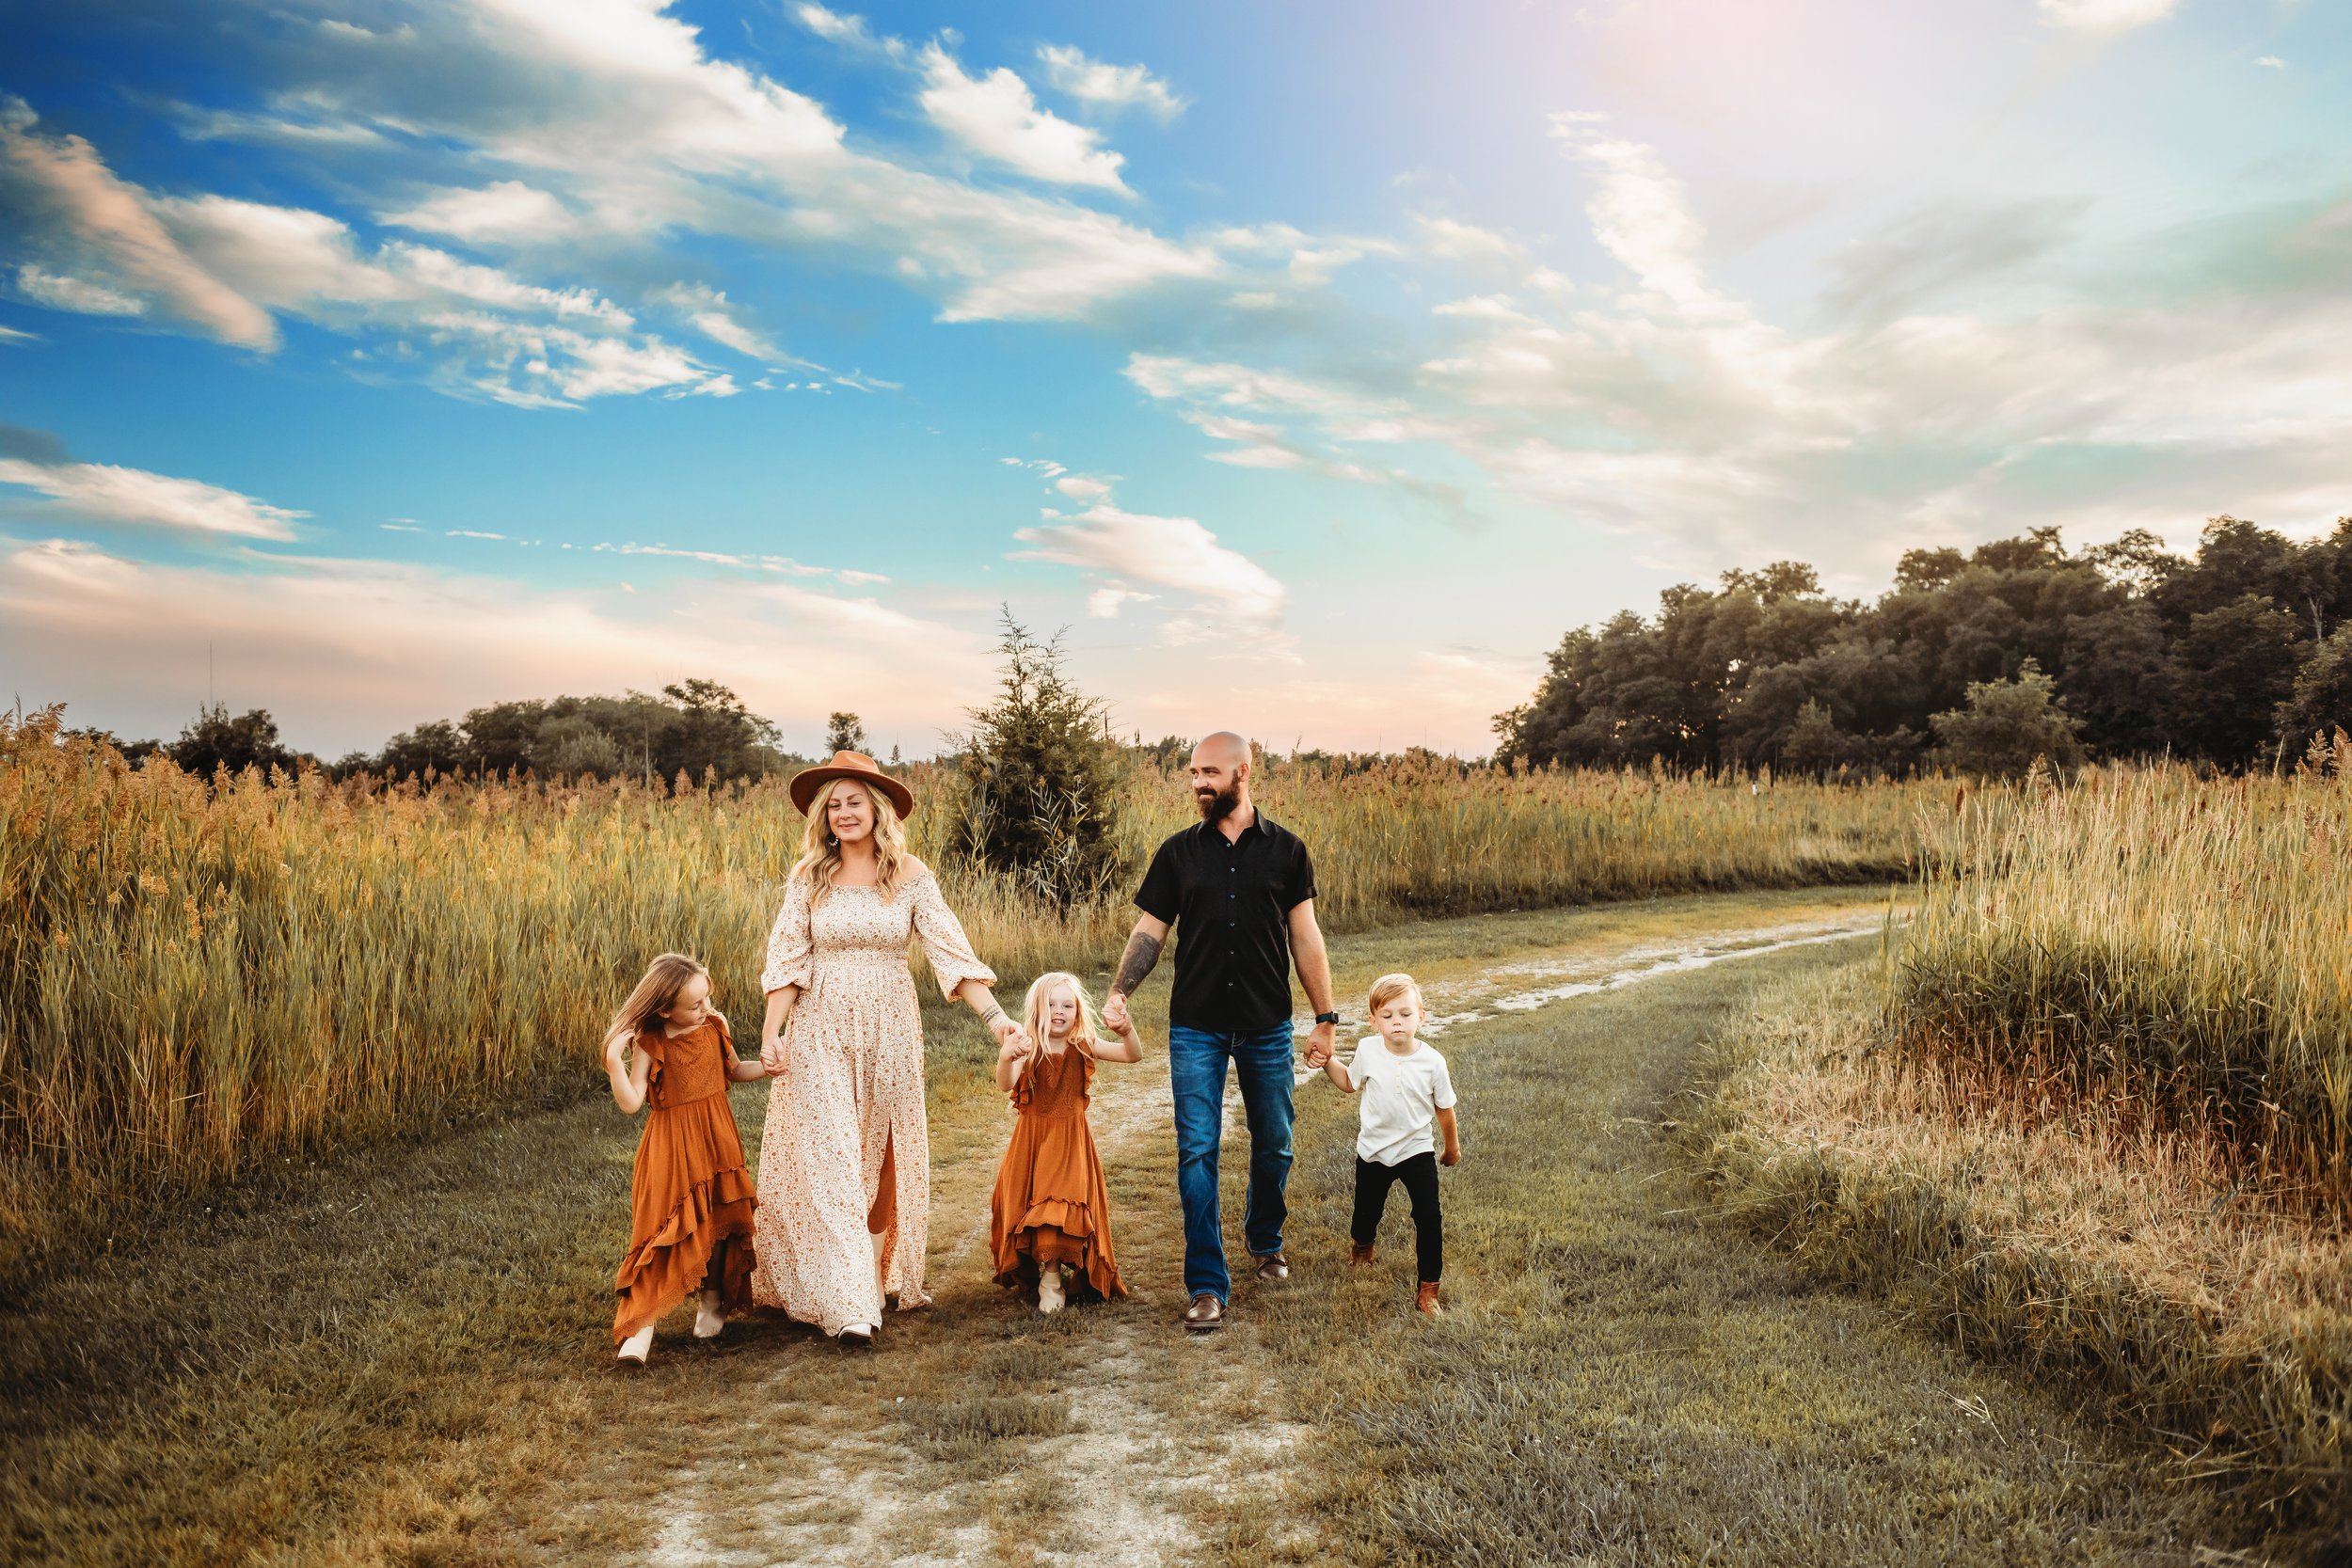  How to help young children enjoy a family photography session with Teala Ward Photography in Illinois. boho family pic family of five #TealaWardPhotography #IllinoisValleyPhotographer #midwestphotography #TealaWardFamilies #Illinoisfamilypictures 